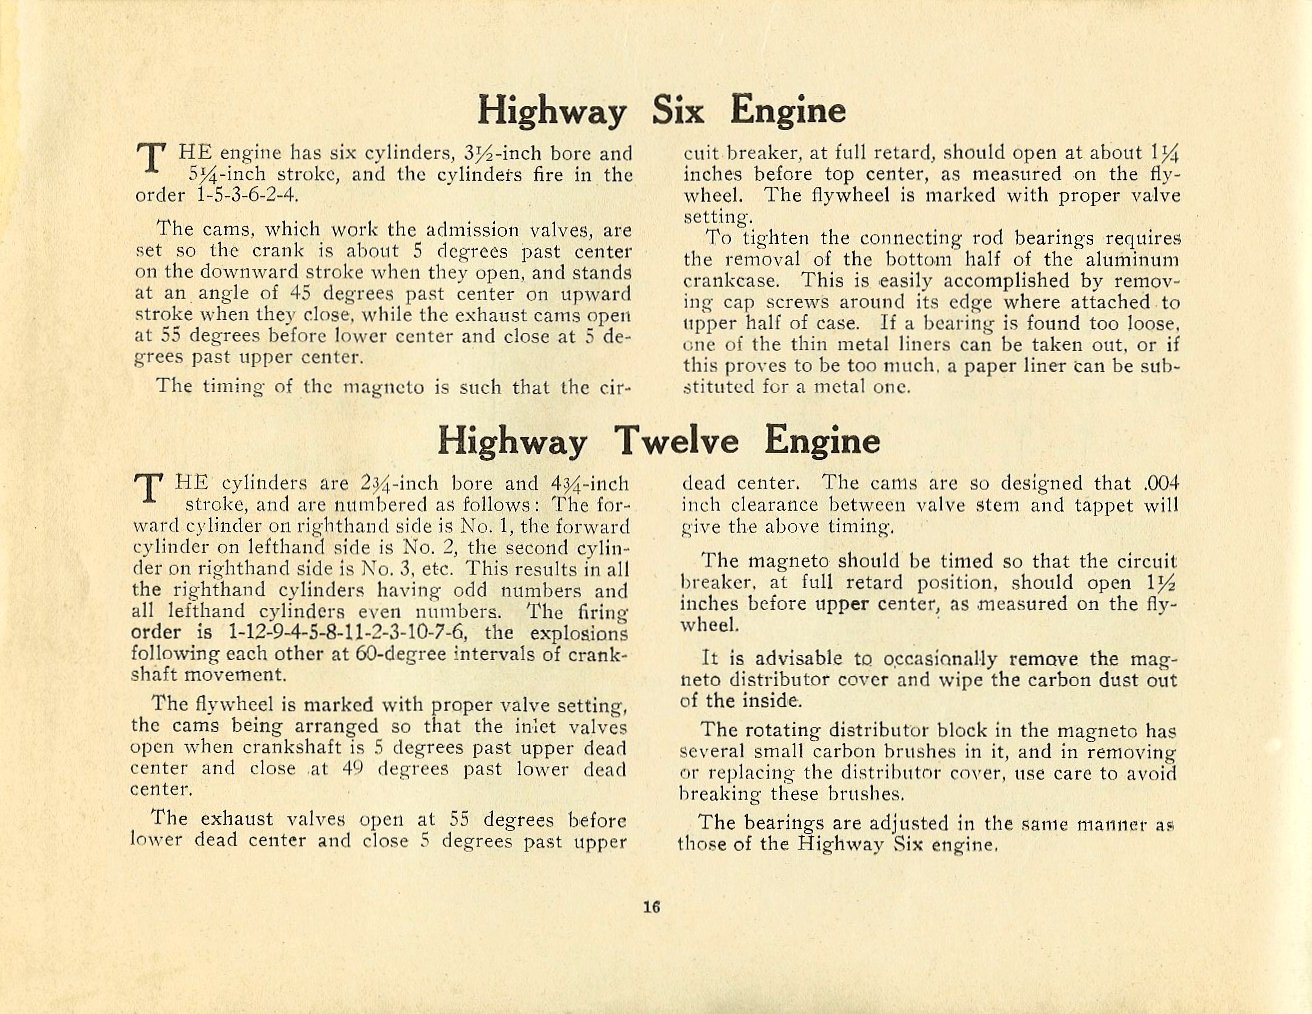 1915 National Owners Owners Manual-16